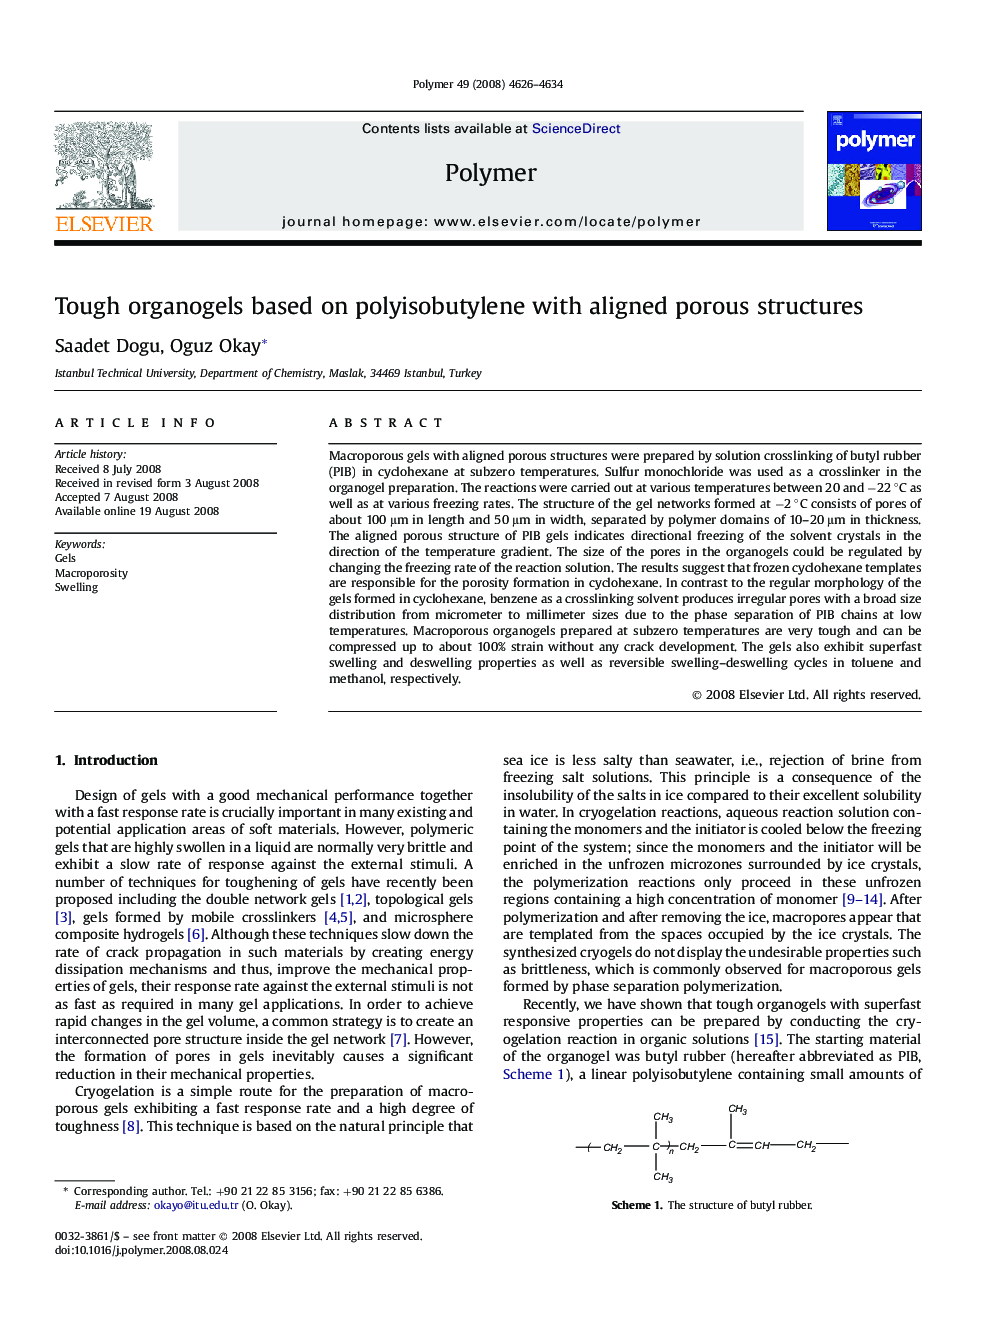 Tough organogels based on polyisobutylene with aligned porous structures